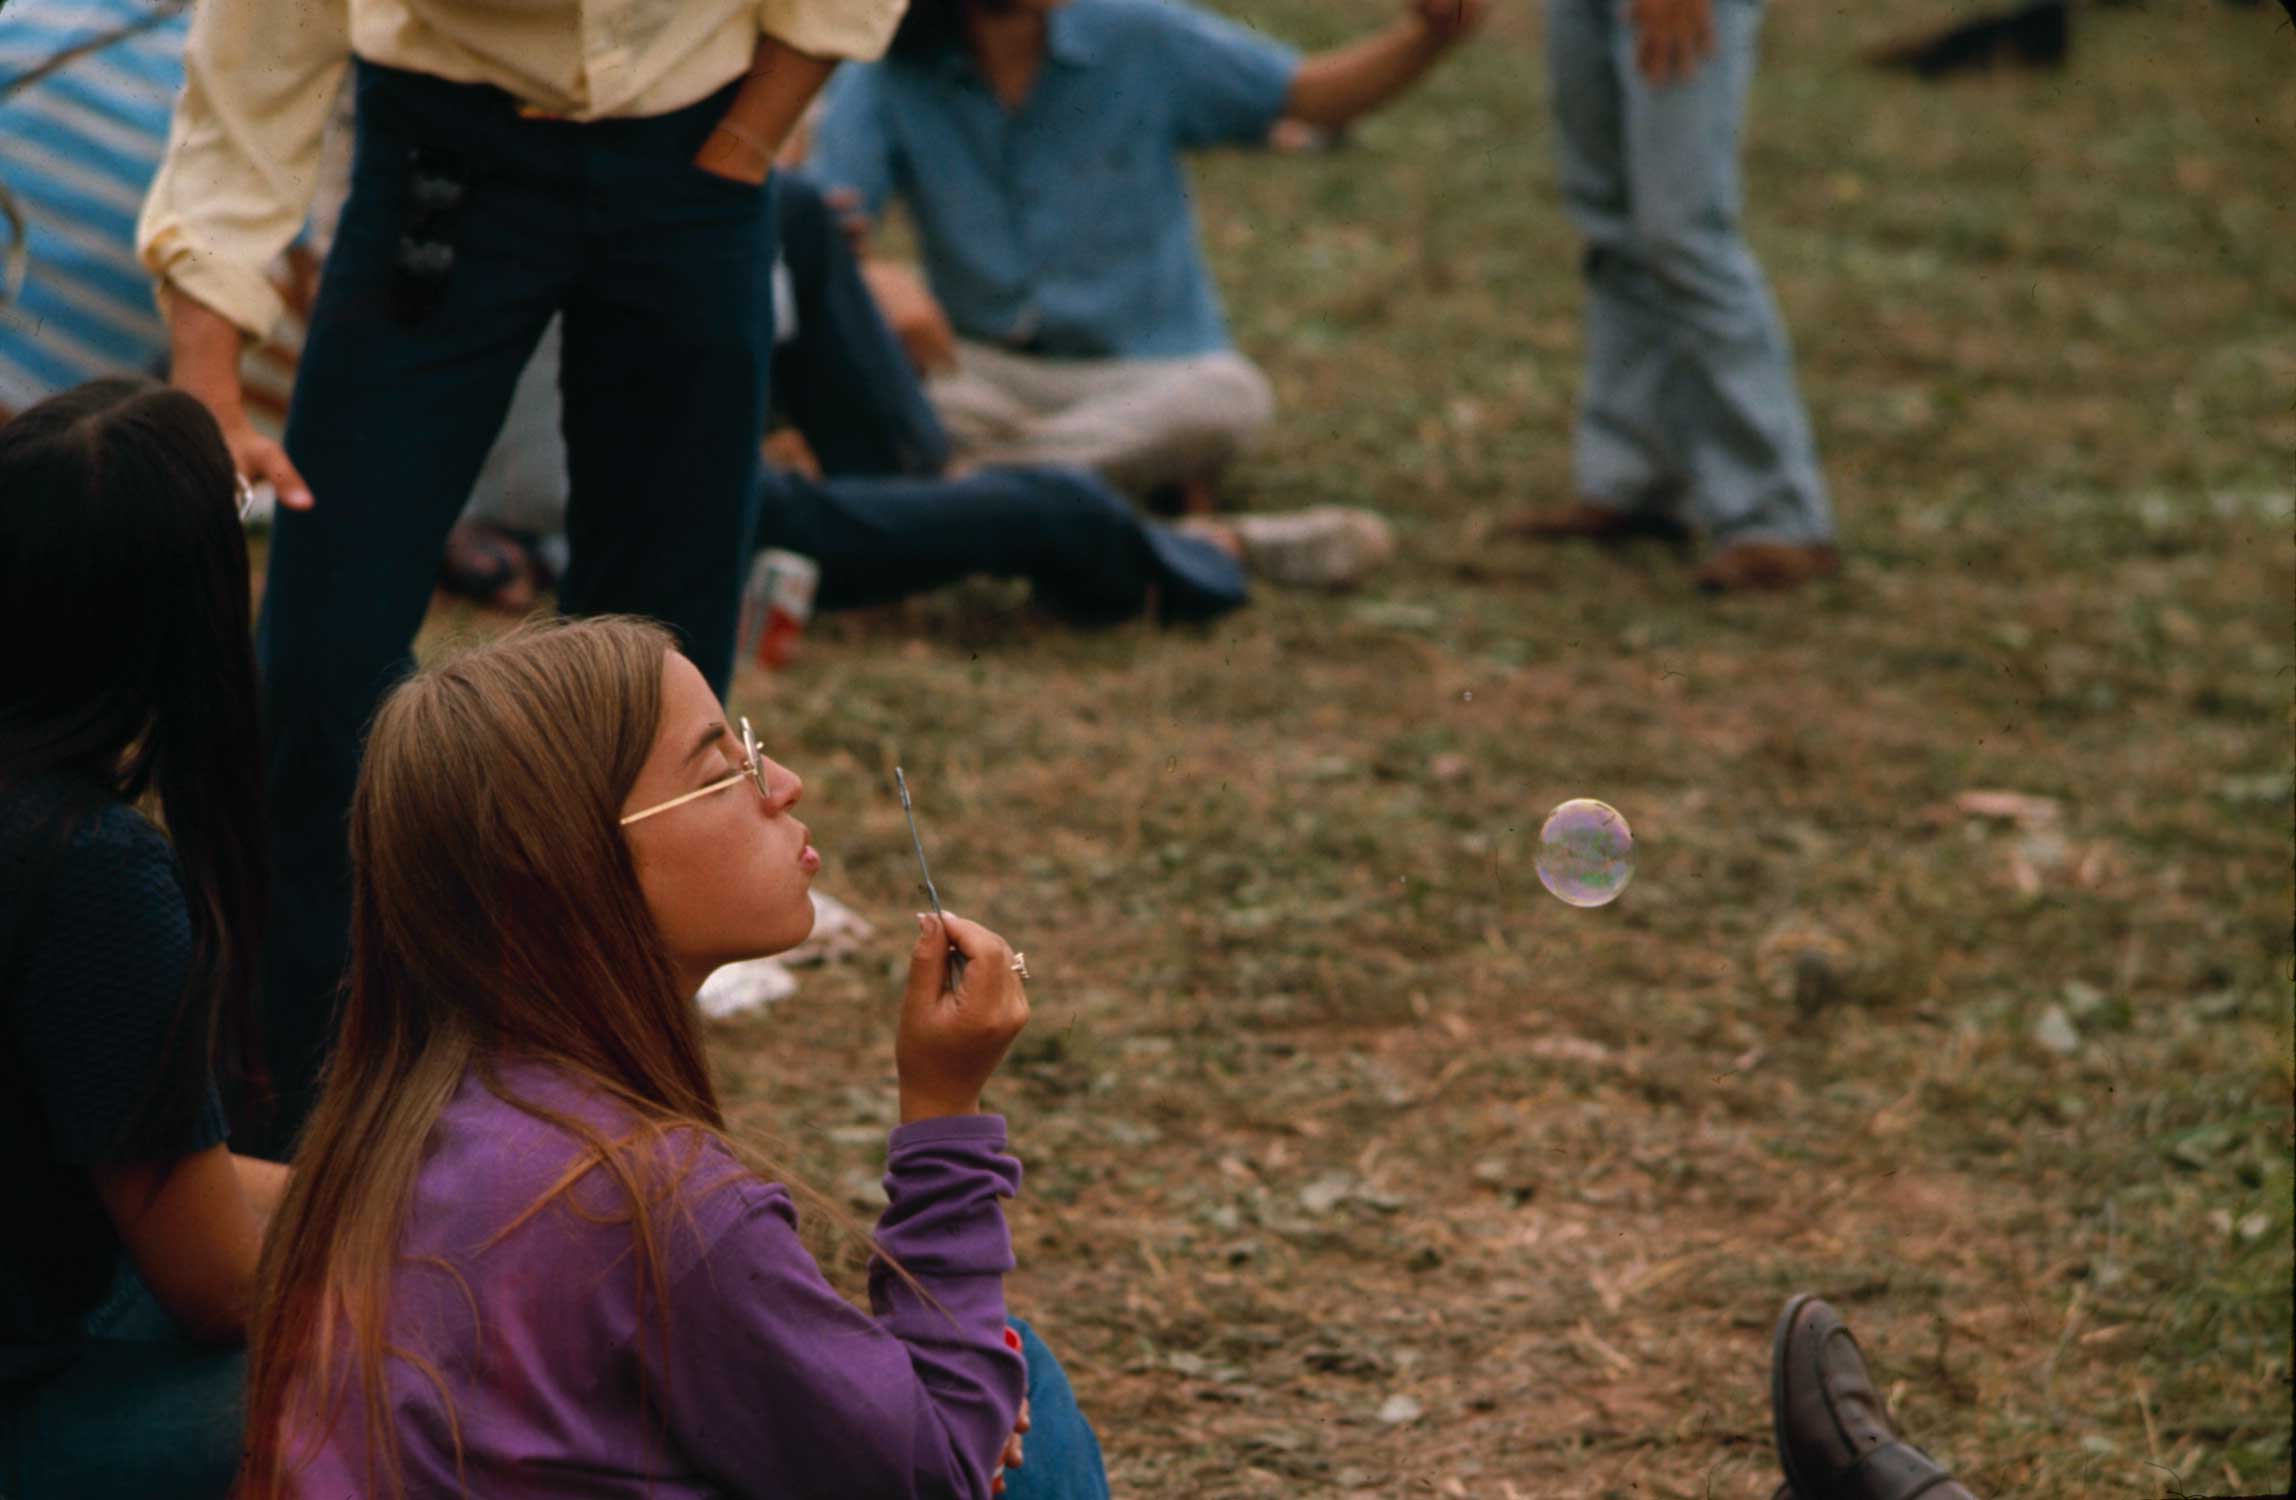 <b>Not published in LIFE.</b> Woodstock Music &amp; Art Fair, August 1969. (John Dominis&mdash;Time &amp; Life Pictures/Getty Images)